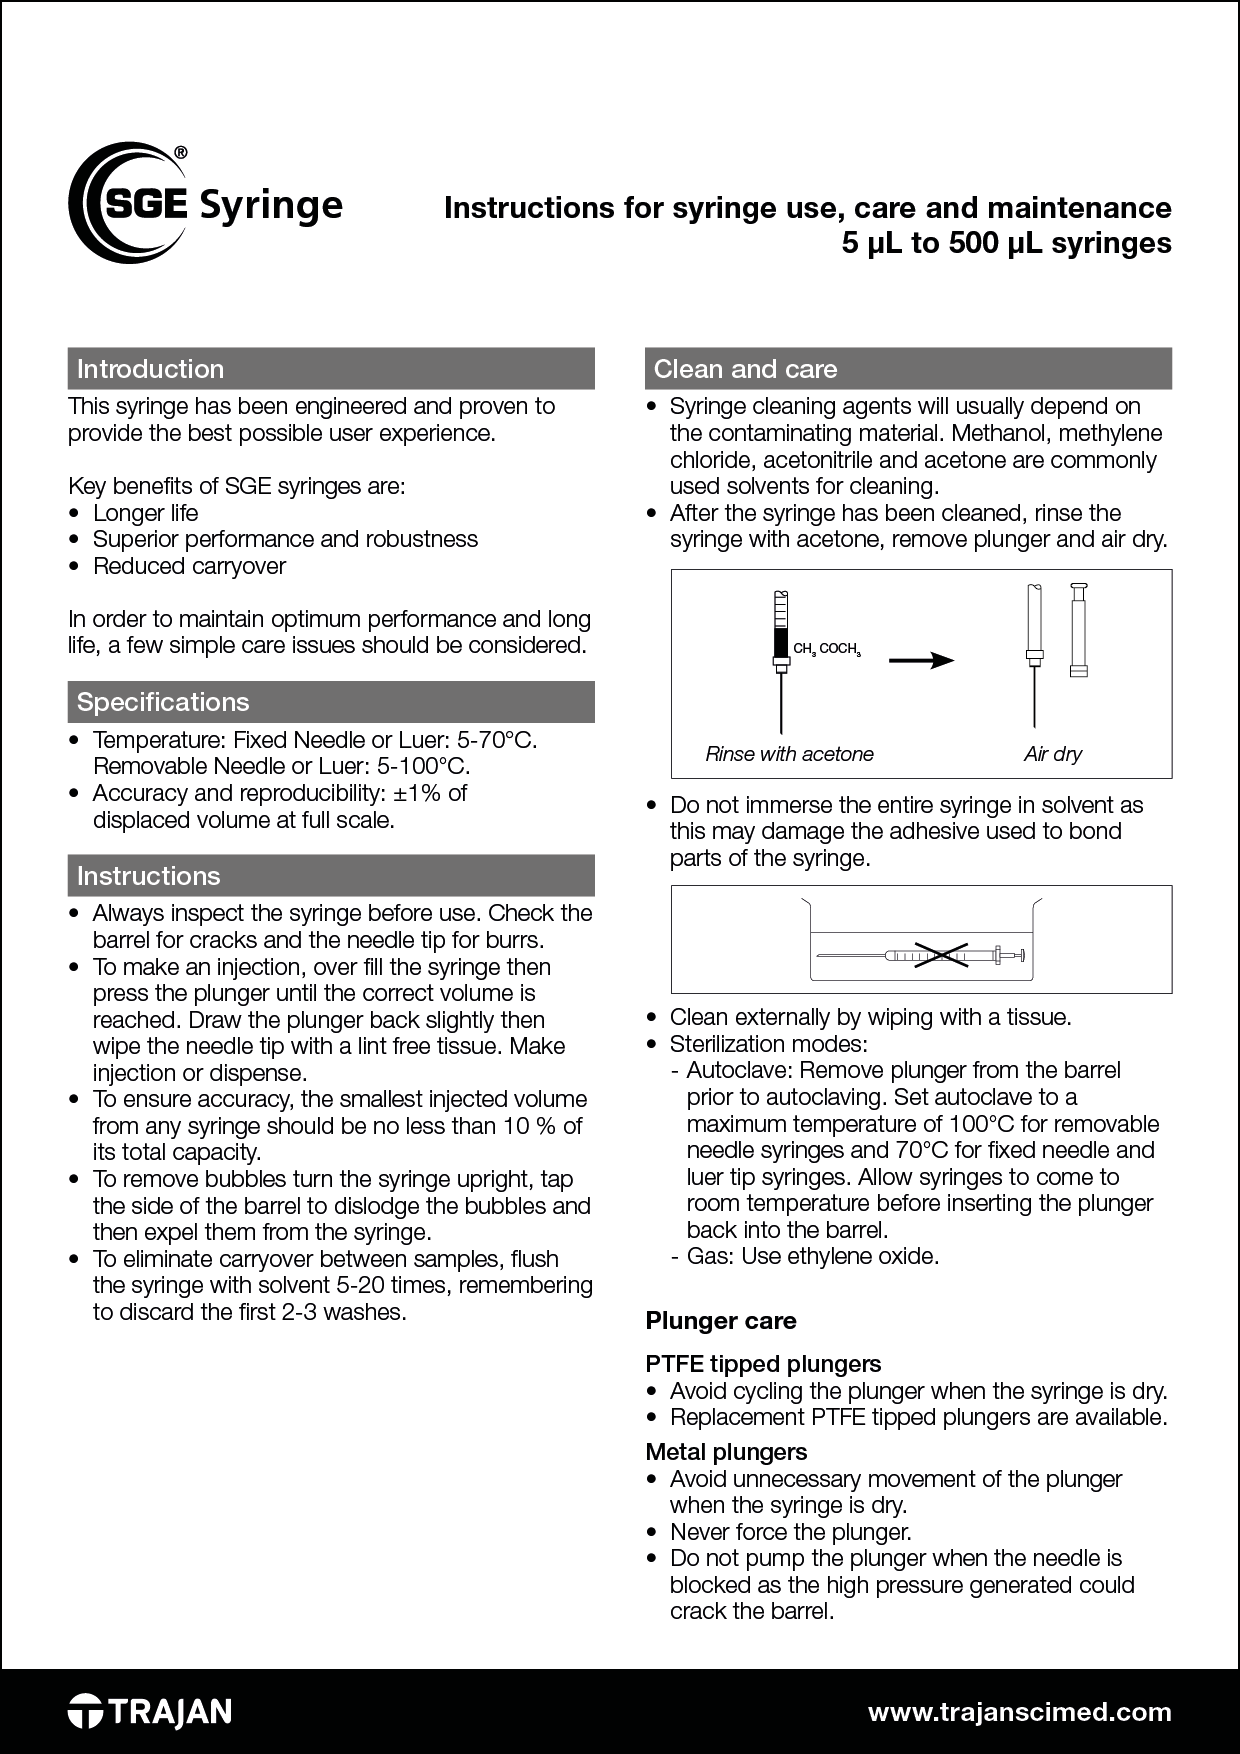 Manual - Instructions for syringe use, care and maintenance 5 µL to 500 µL syringes